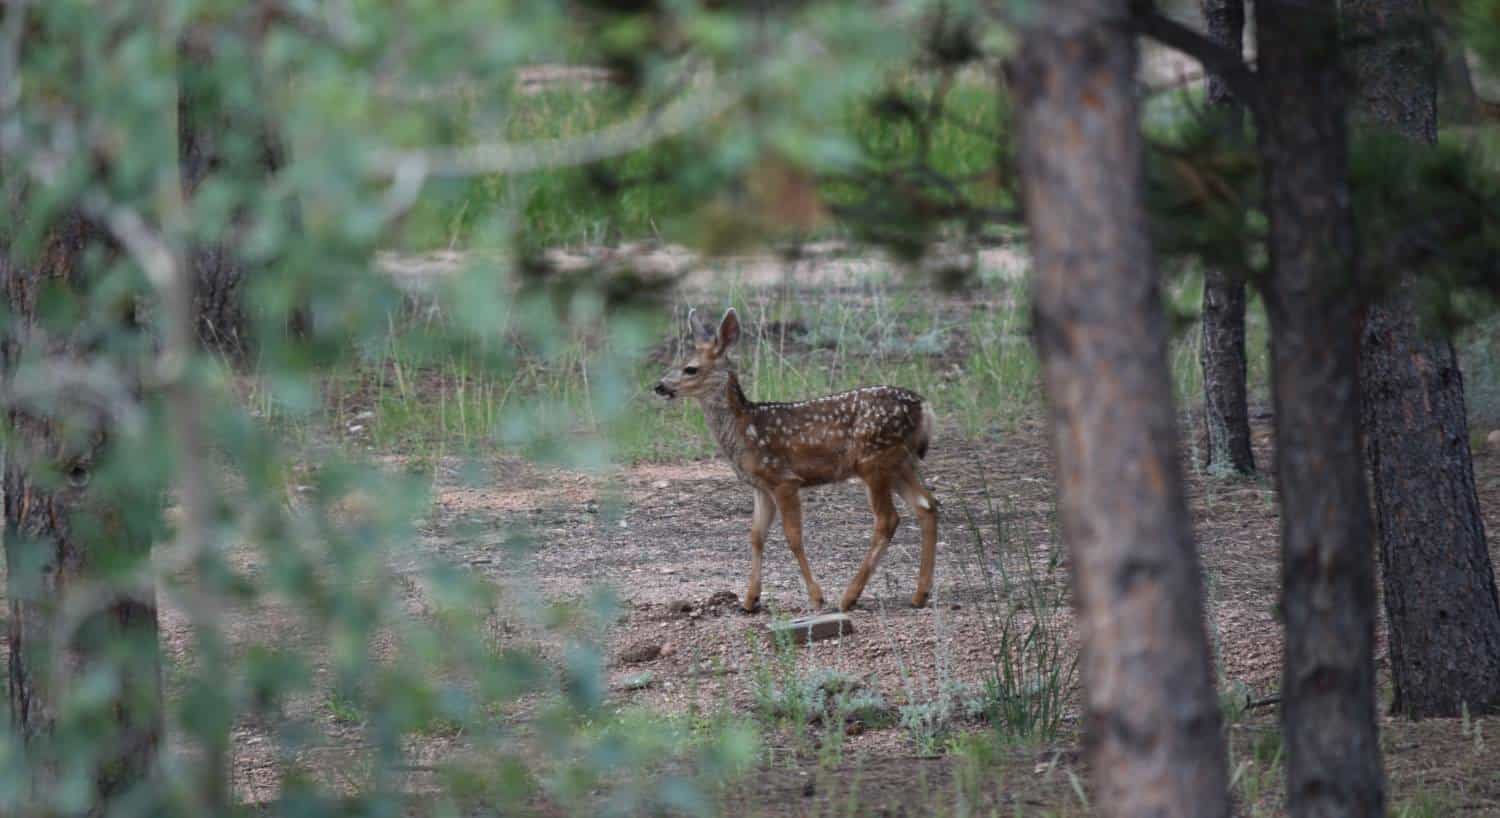 A little fawn standing amongst many pine trees